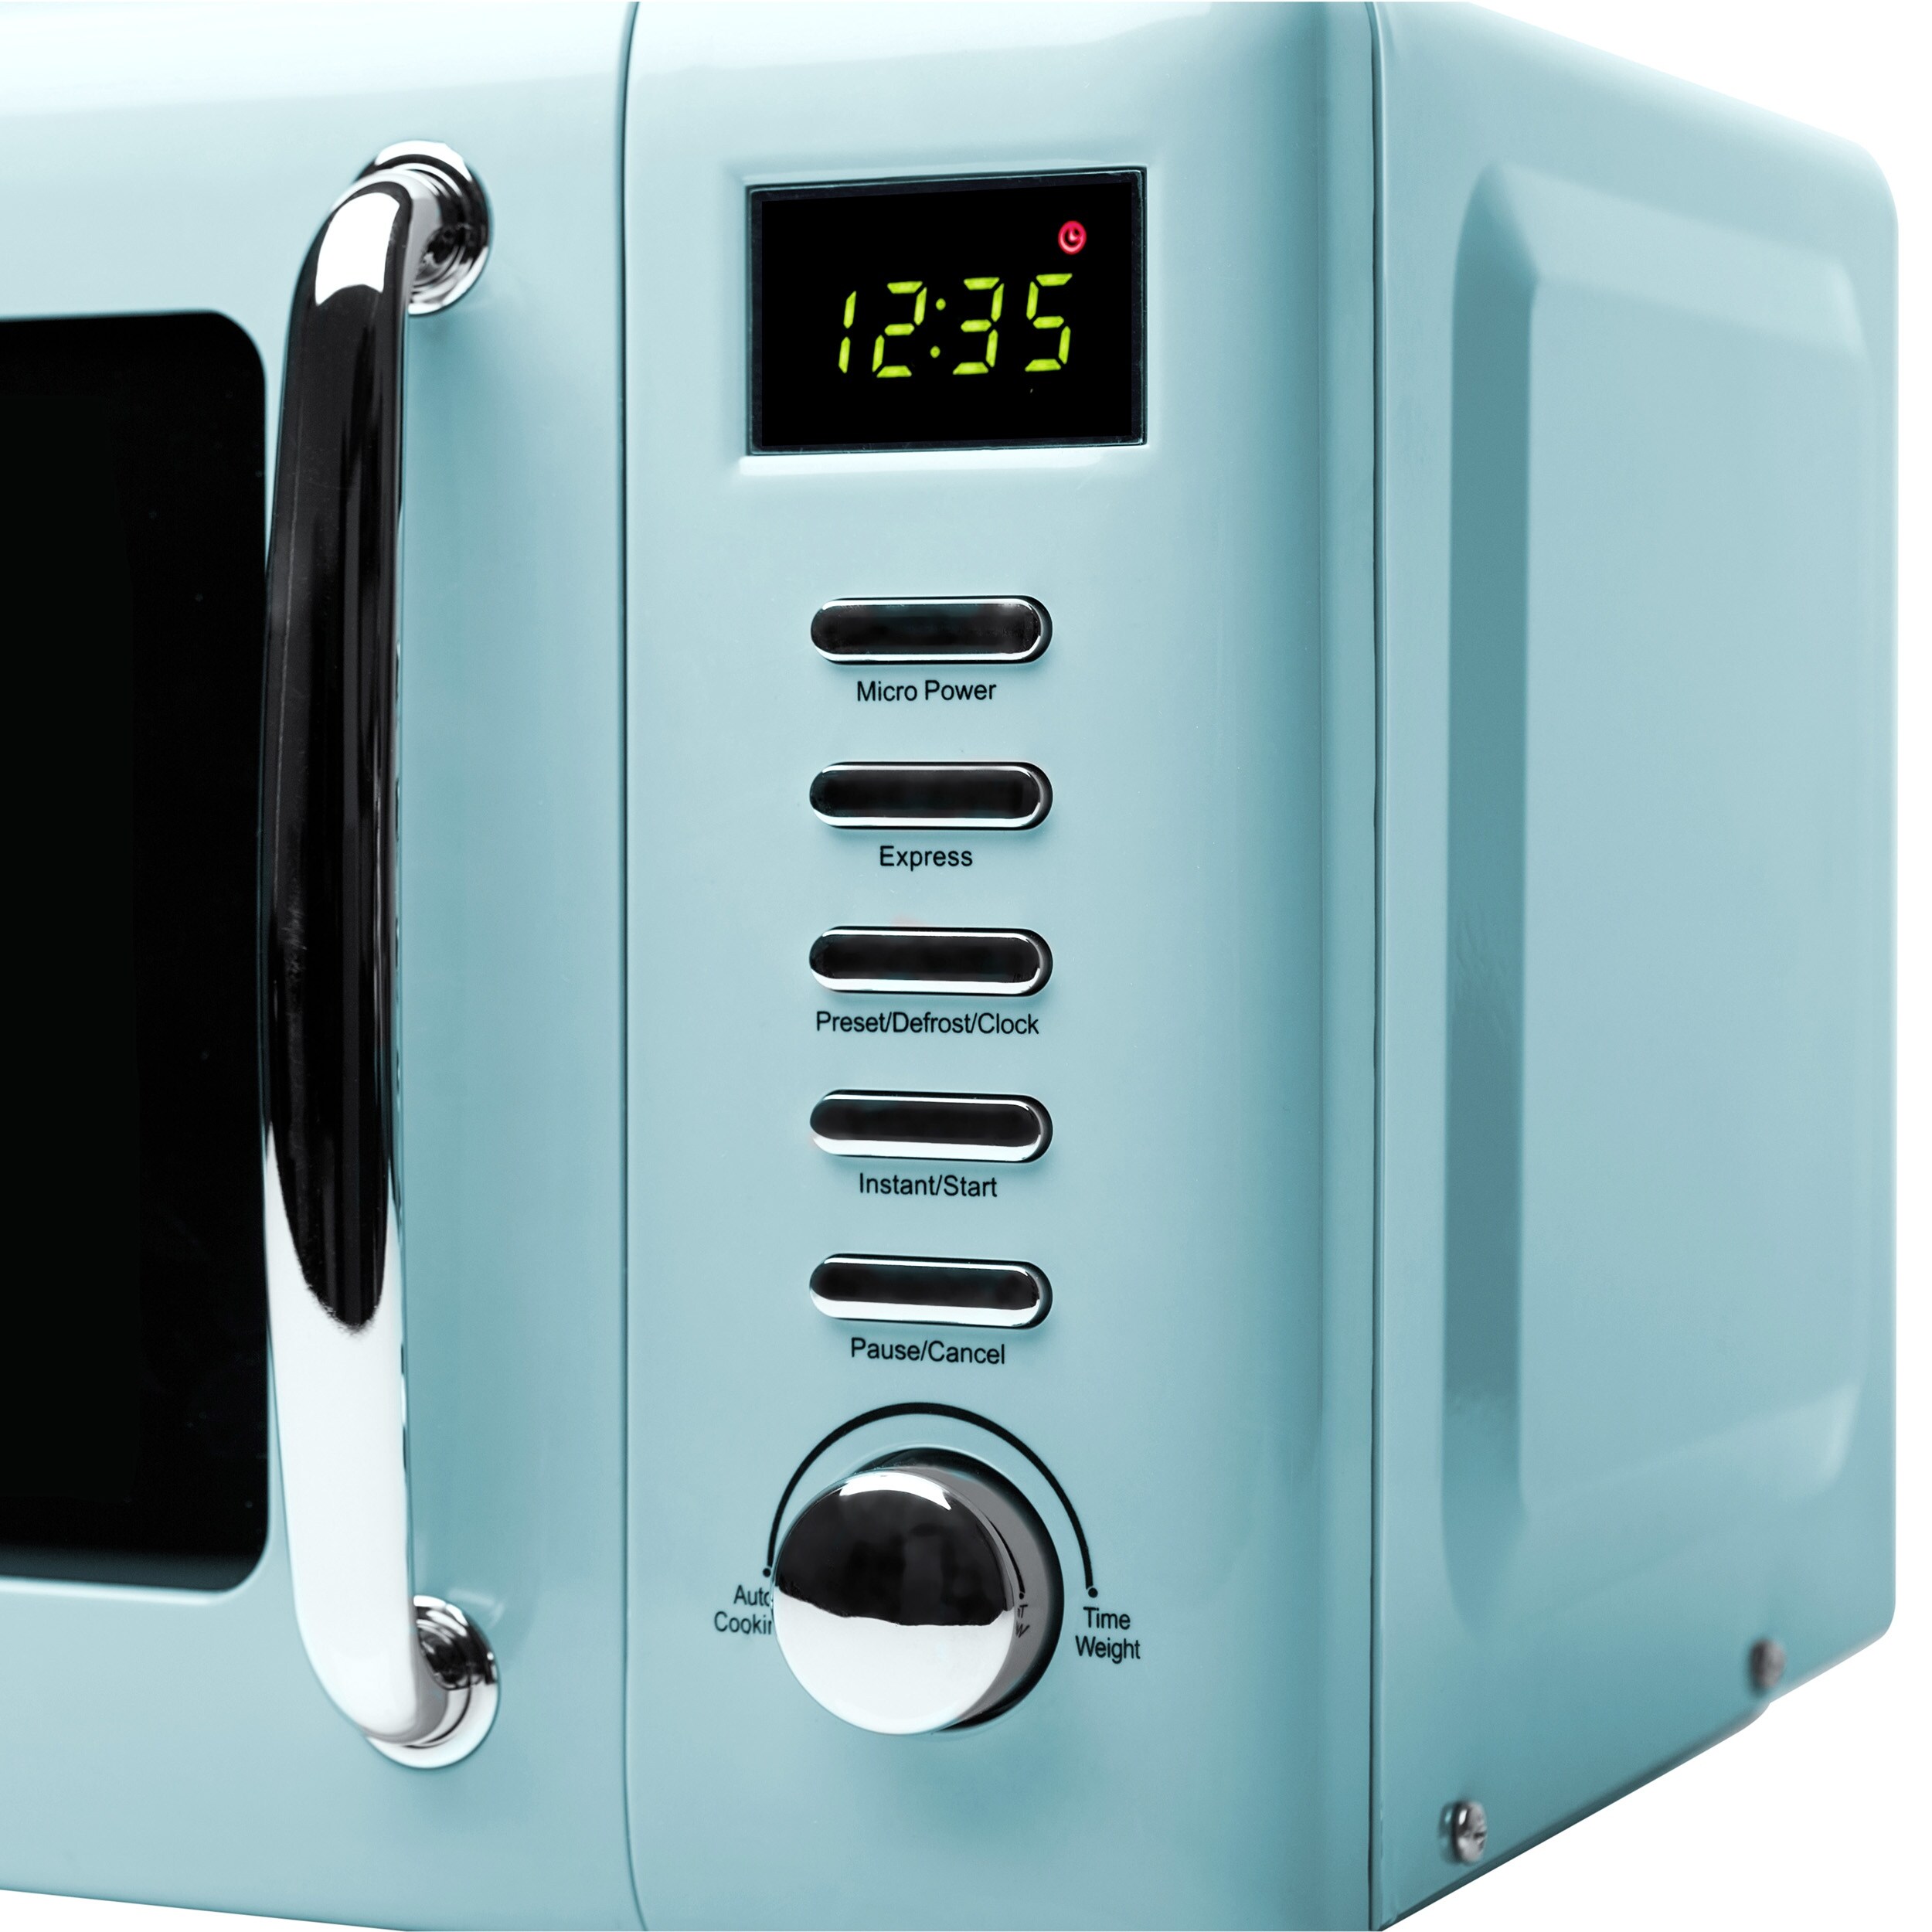 https://ak1.ostkcdn.com/images/products/is/images/direct/30d34418fb49f209978fc5ee6968bbd72d9d1b44/Haden-700-Watt-.7-cubic-foot-Microwave-with-Settings-and-Timer.jpg